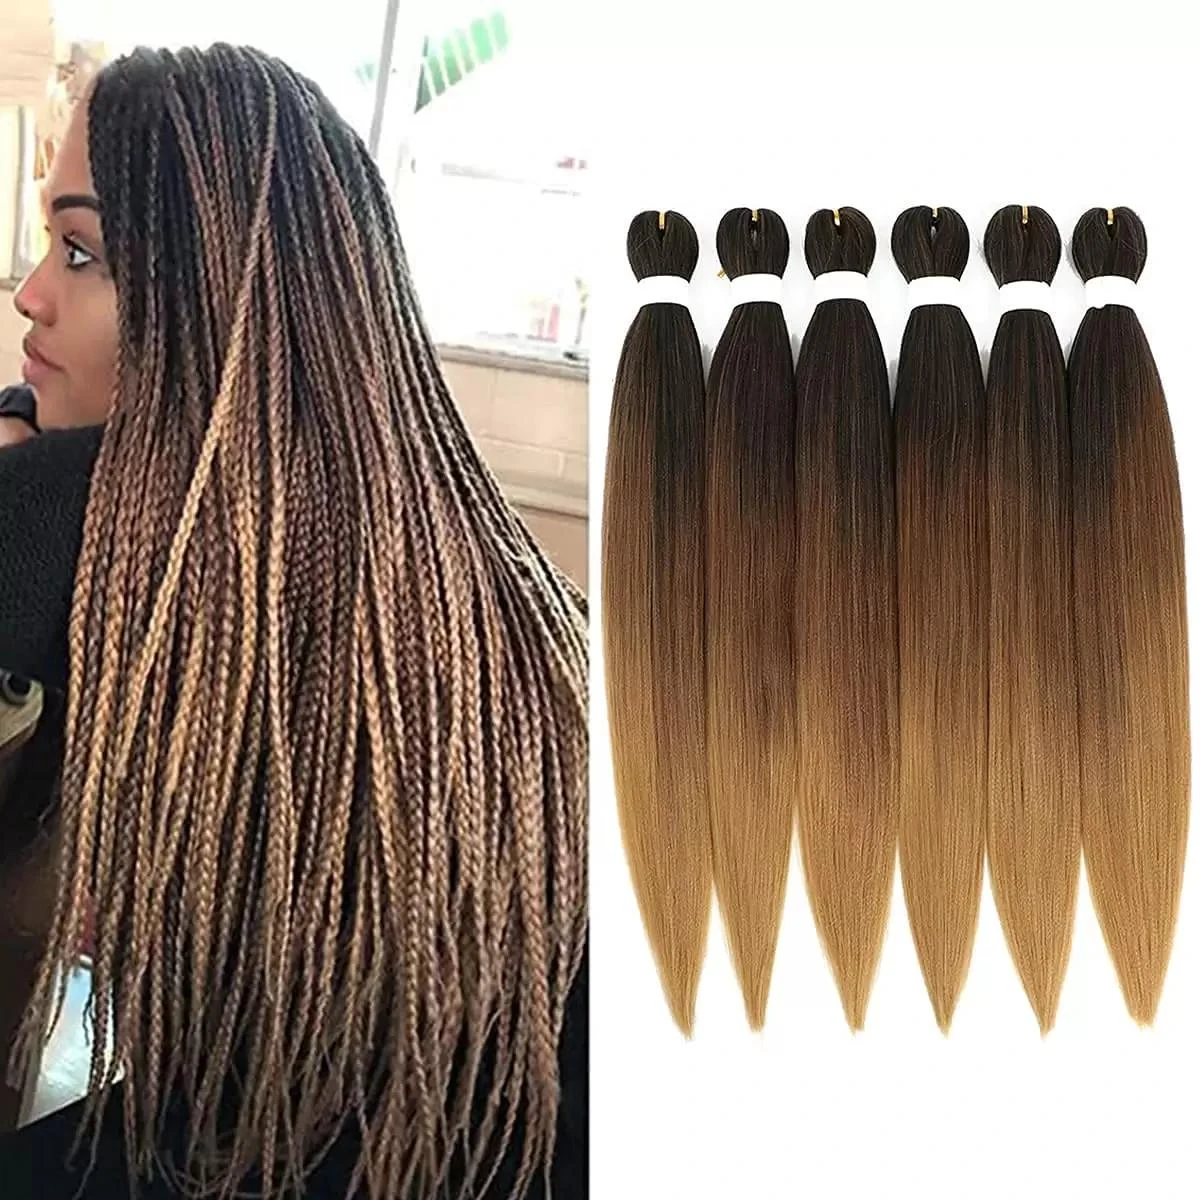 26 Inch Pre Stretched Braiding Hair Extensions, Professional Easy Braids  Synthetic Fibers Itch Free Yaki Texture Pre-stretched - Crochet Hair -  AliExpress